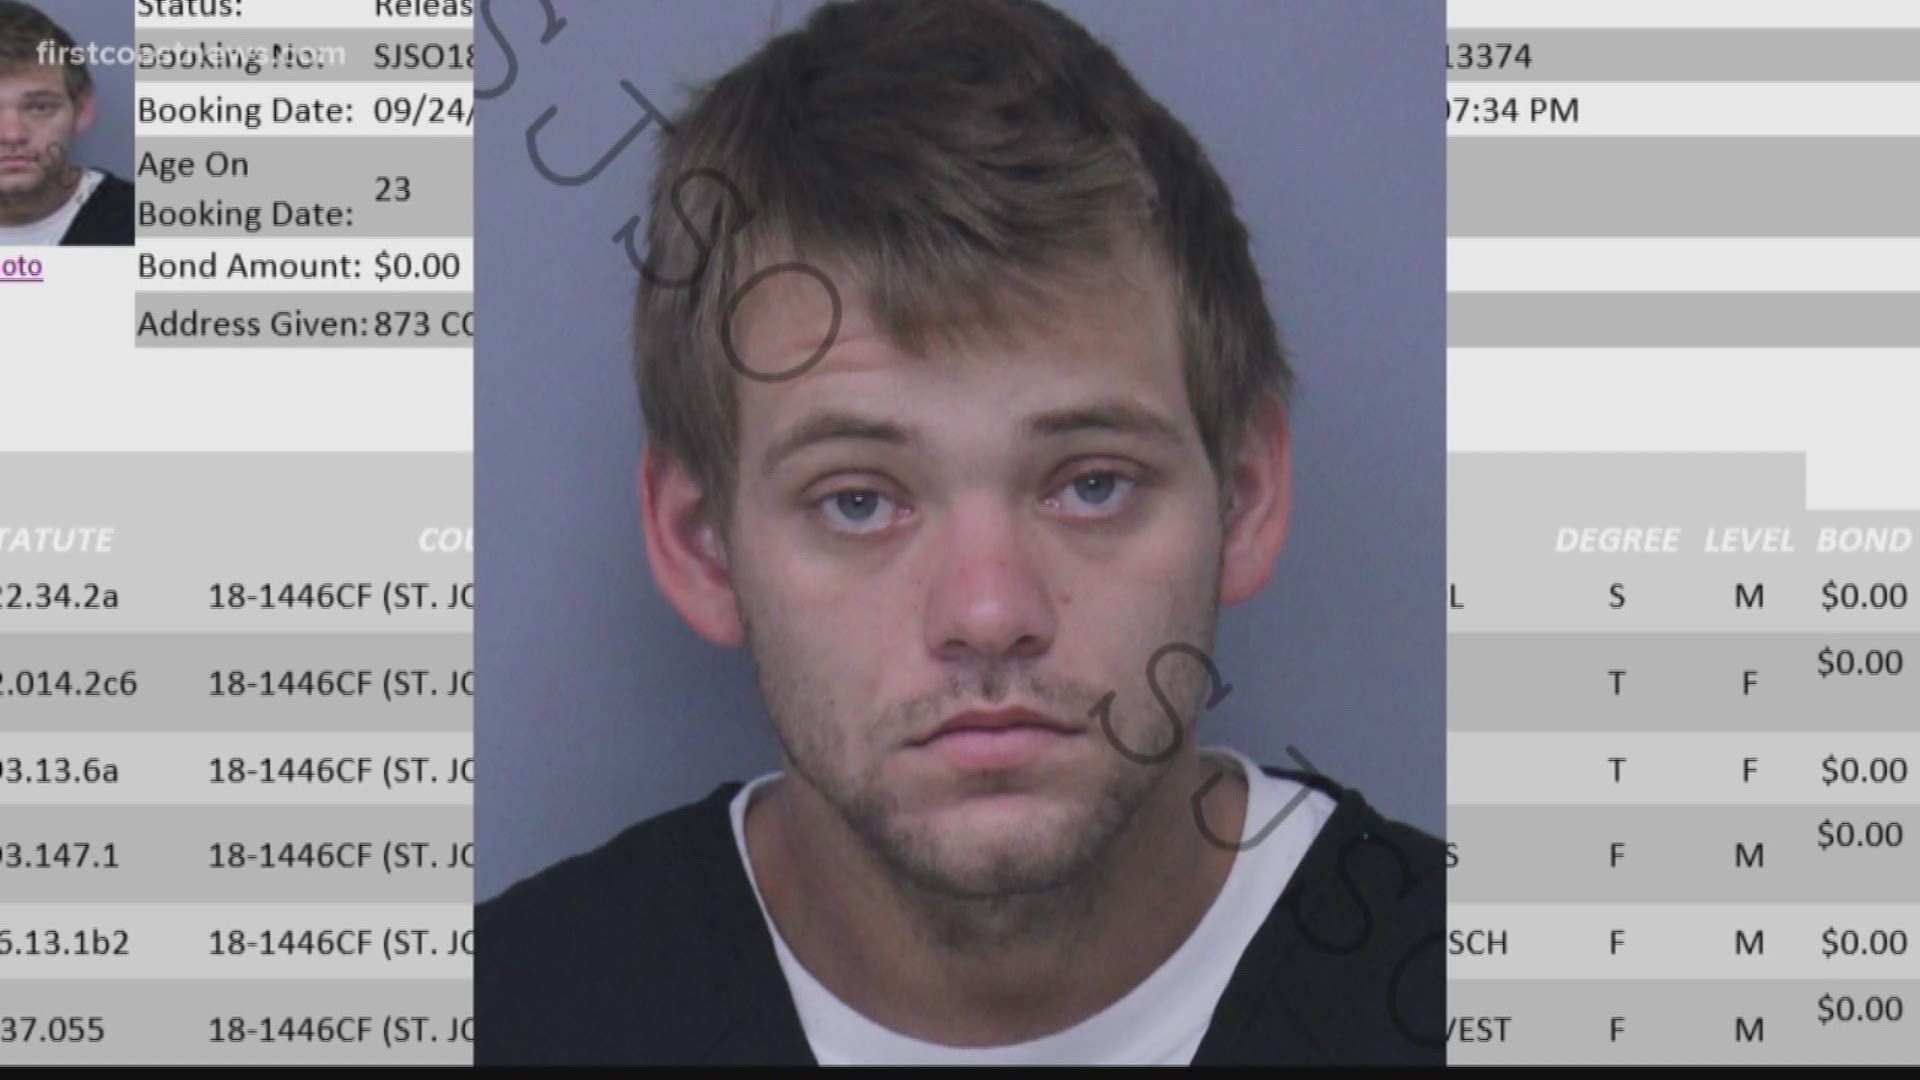 The St. Augustine Police told First Coast News that man was "probably high on something" and that a toxicology test was done to determine what was in his system.